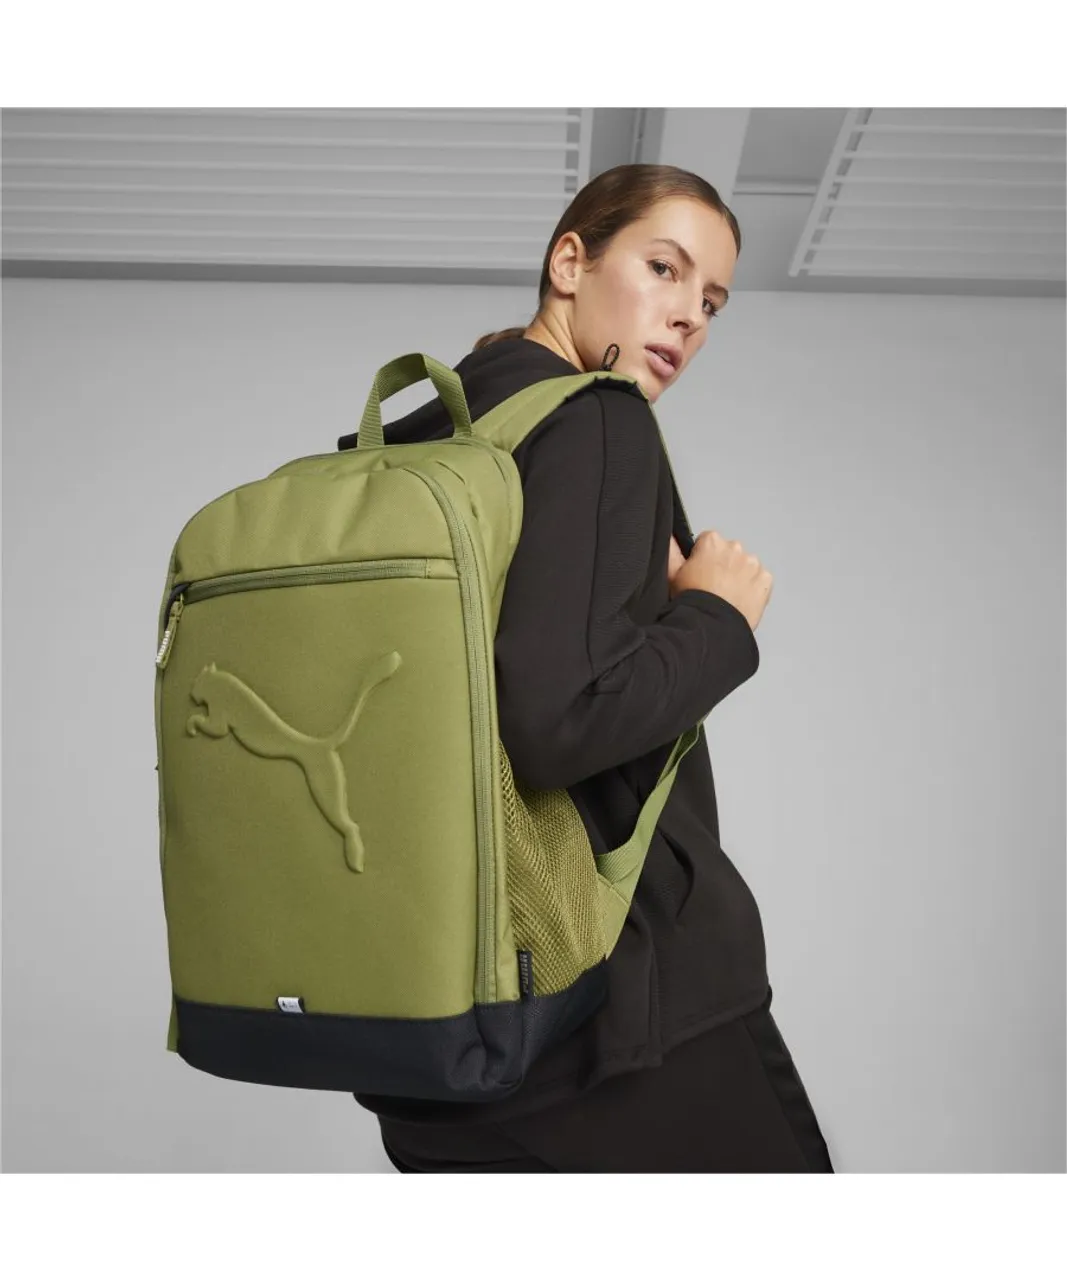 Puma Unisex Buzz Backpack - Green - One Size